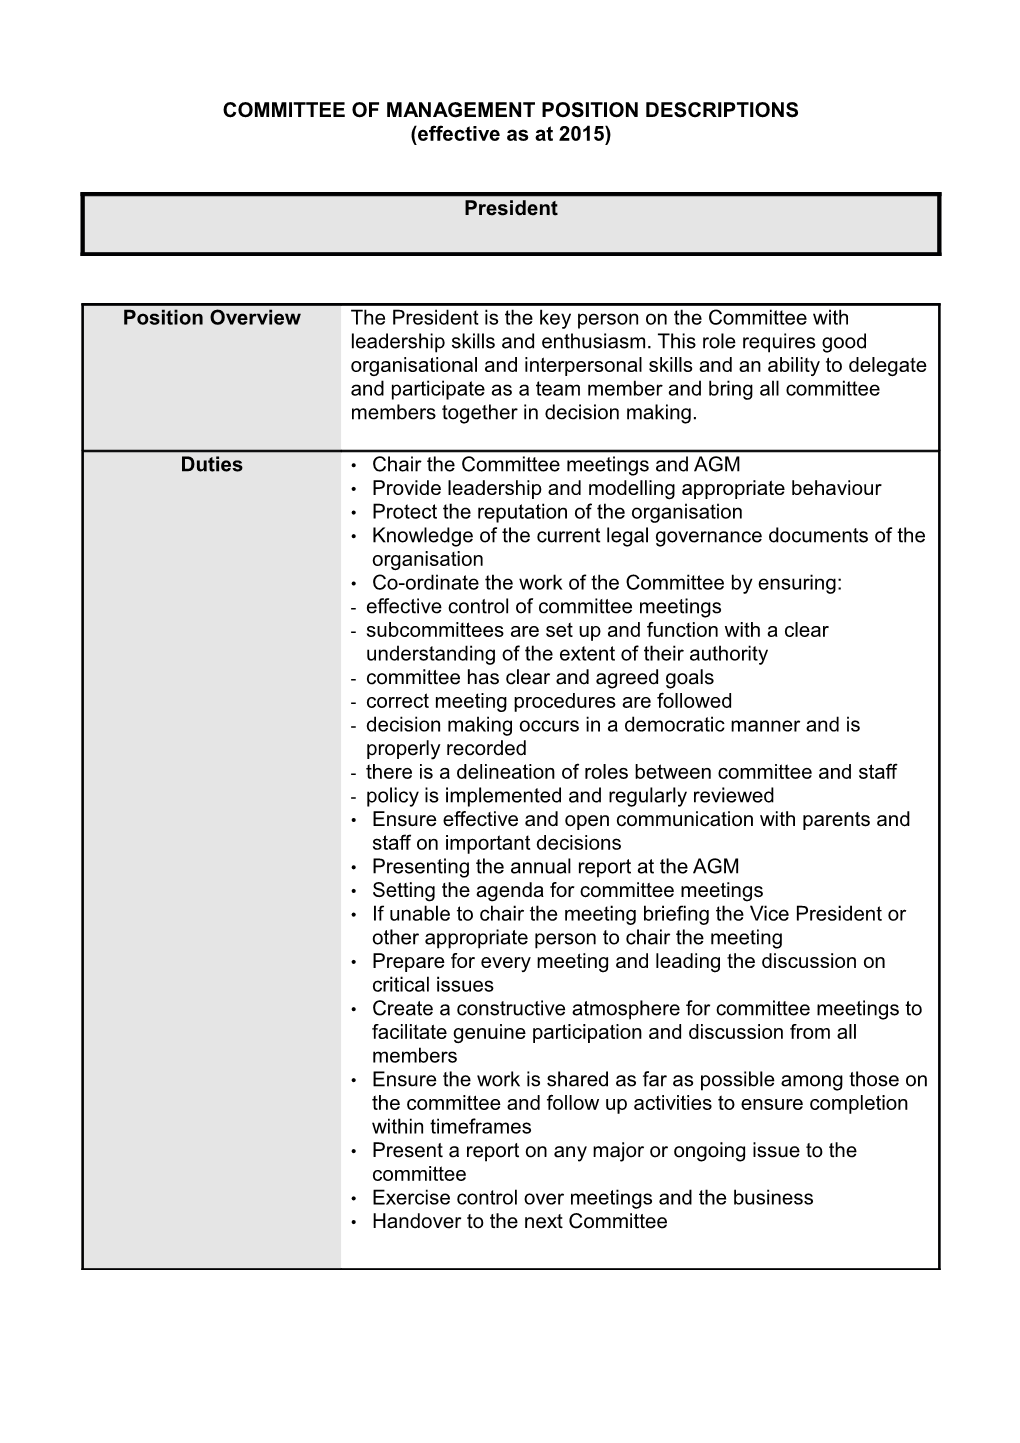 Committee of Management Position Descriptions